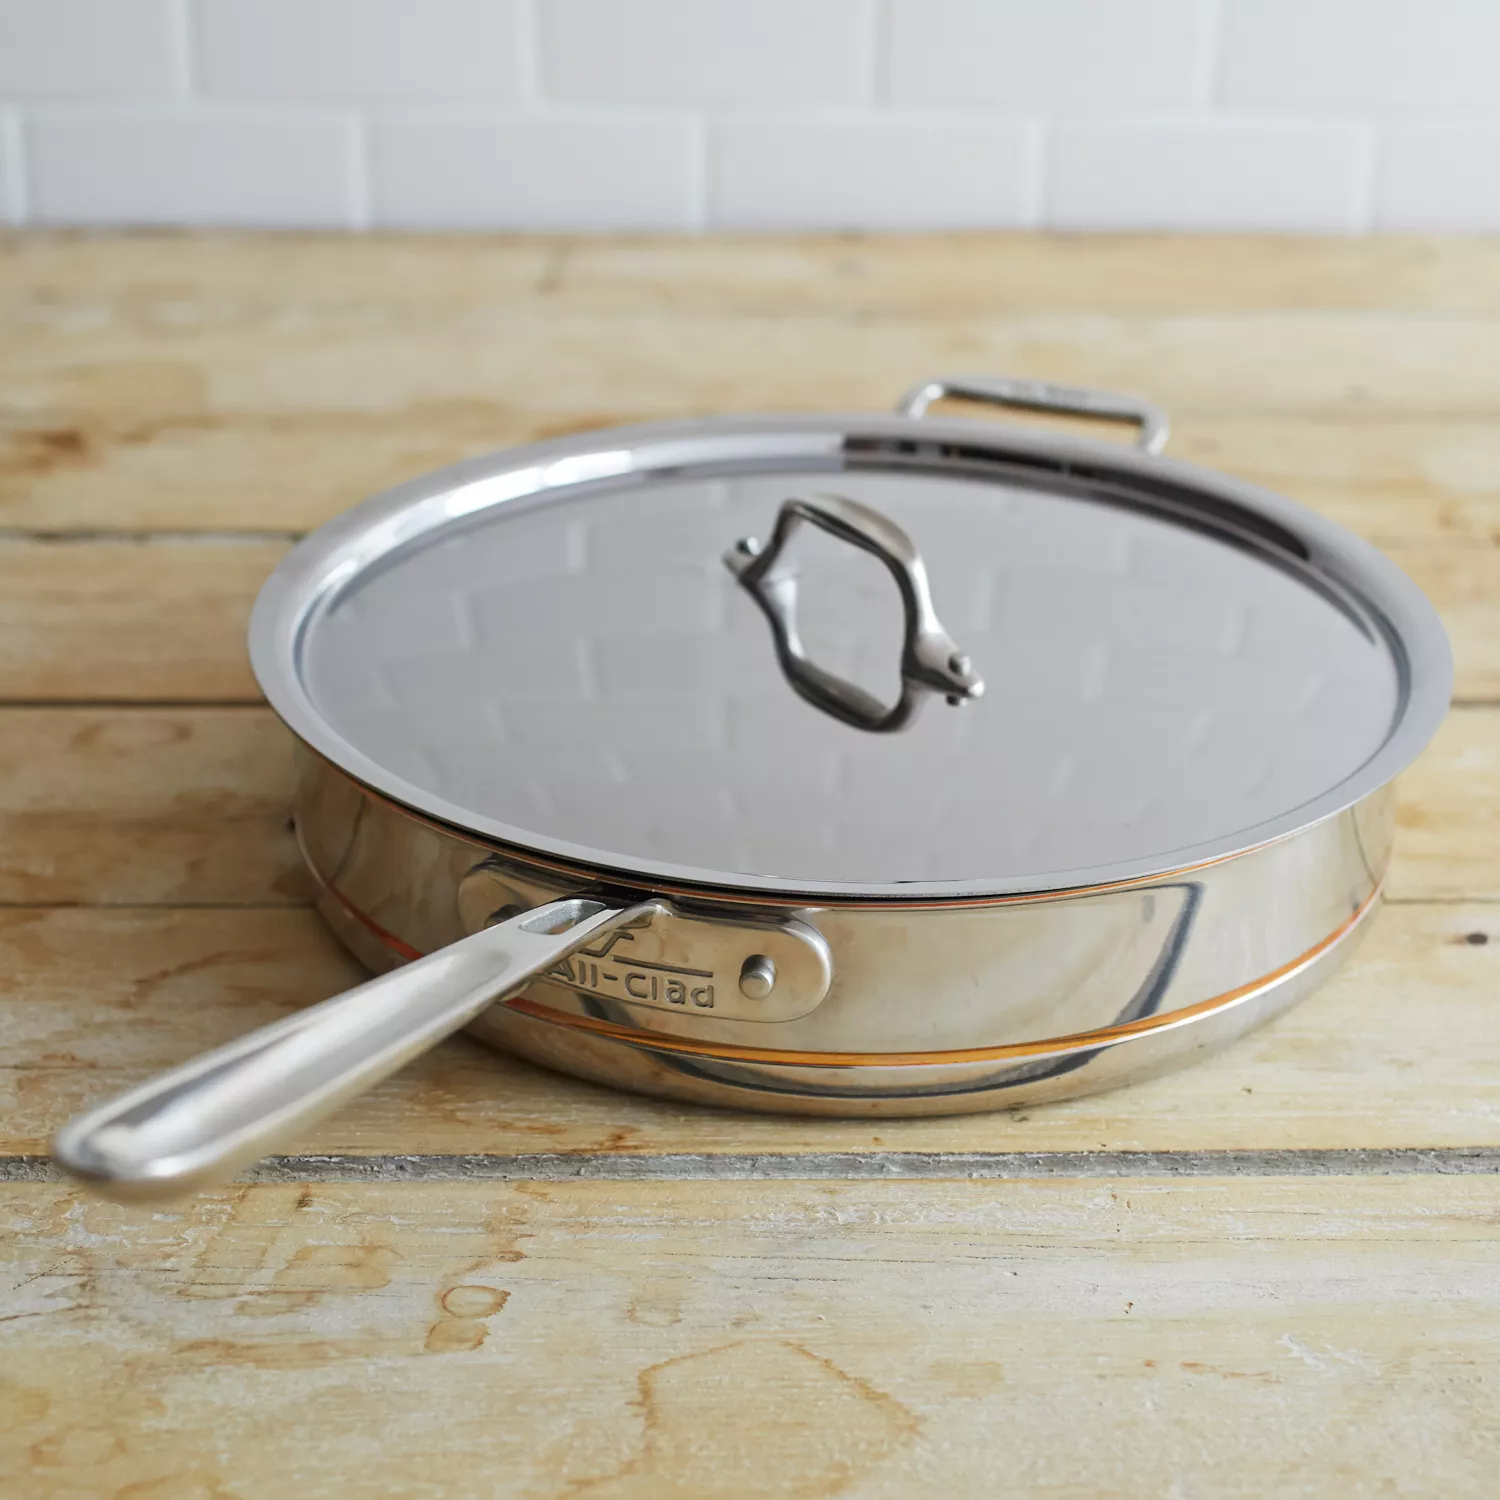 All Clad 6406 stainless steel 6 quart Copper Core 5 Ply Saute Pan